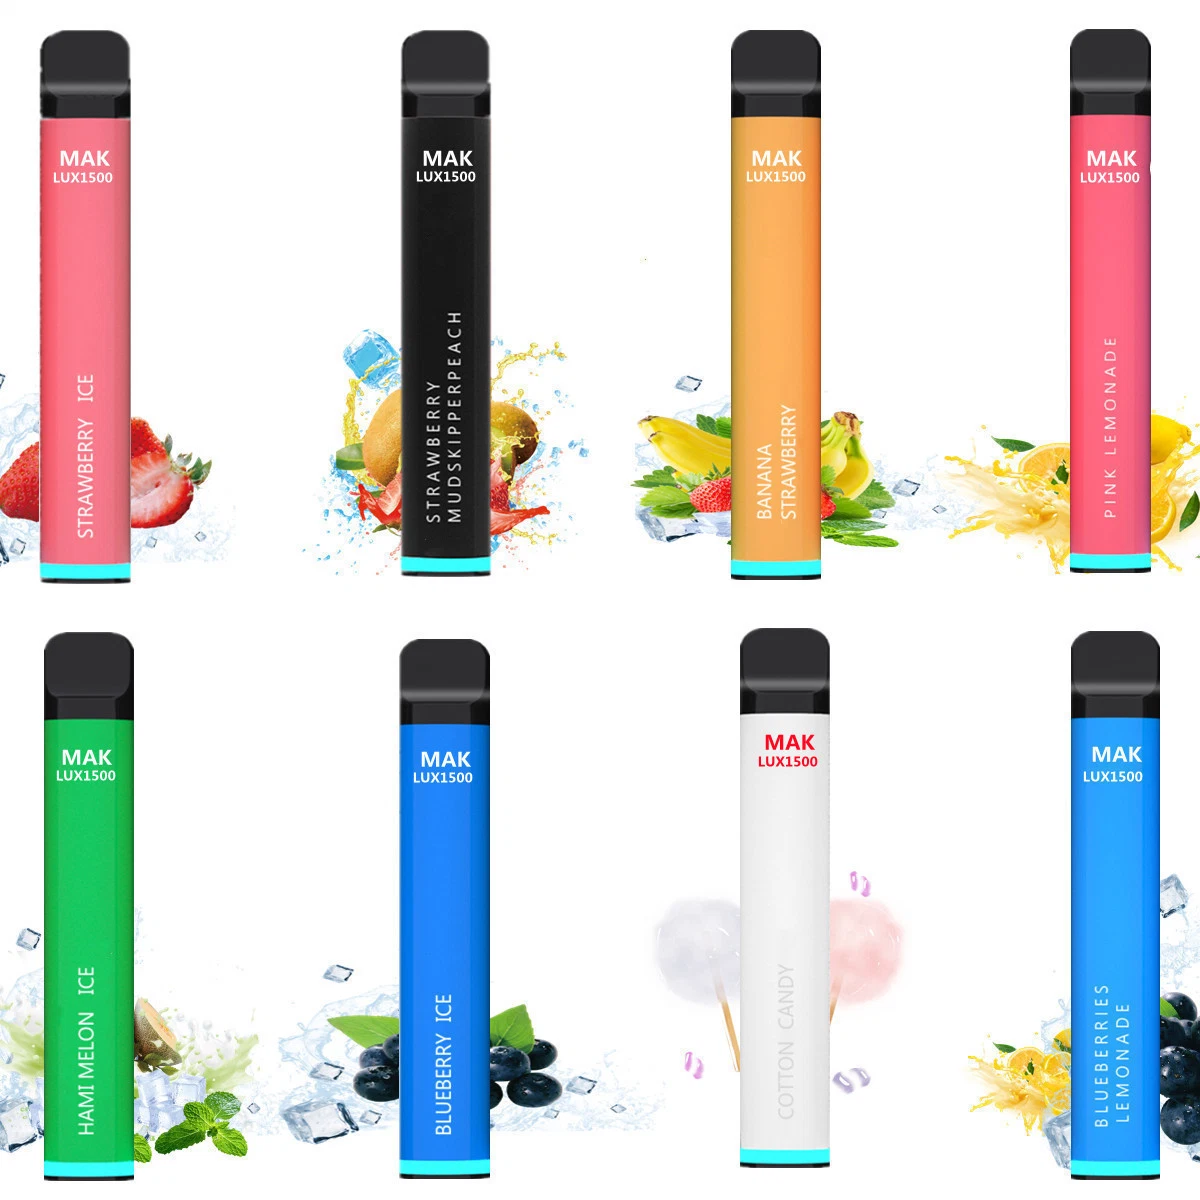 Mak Lux 600 800 1500 Puffs 5000puffs Nicotine Free 0% 2% 5% E Cigarette Mak Disposable/Chargeable Vape